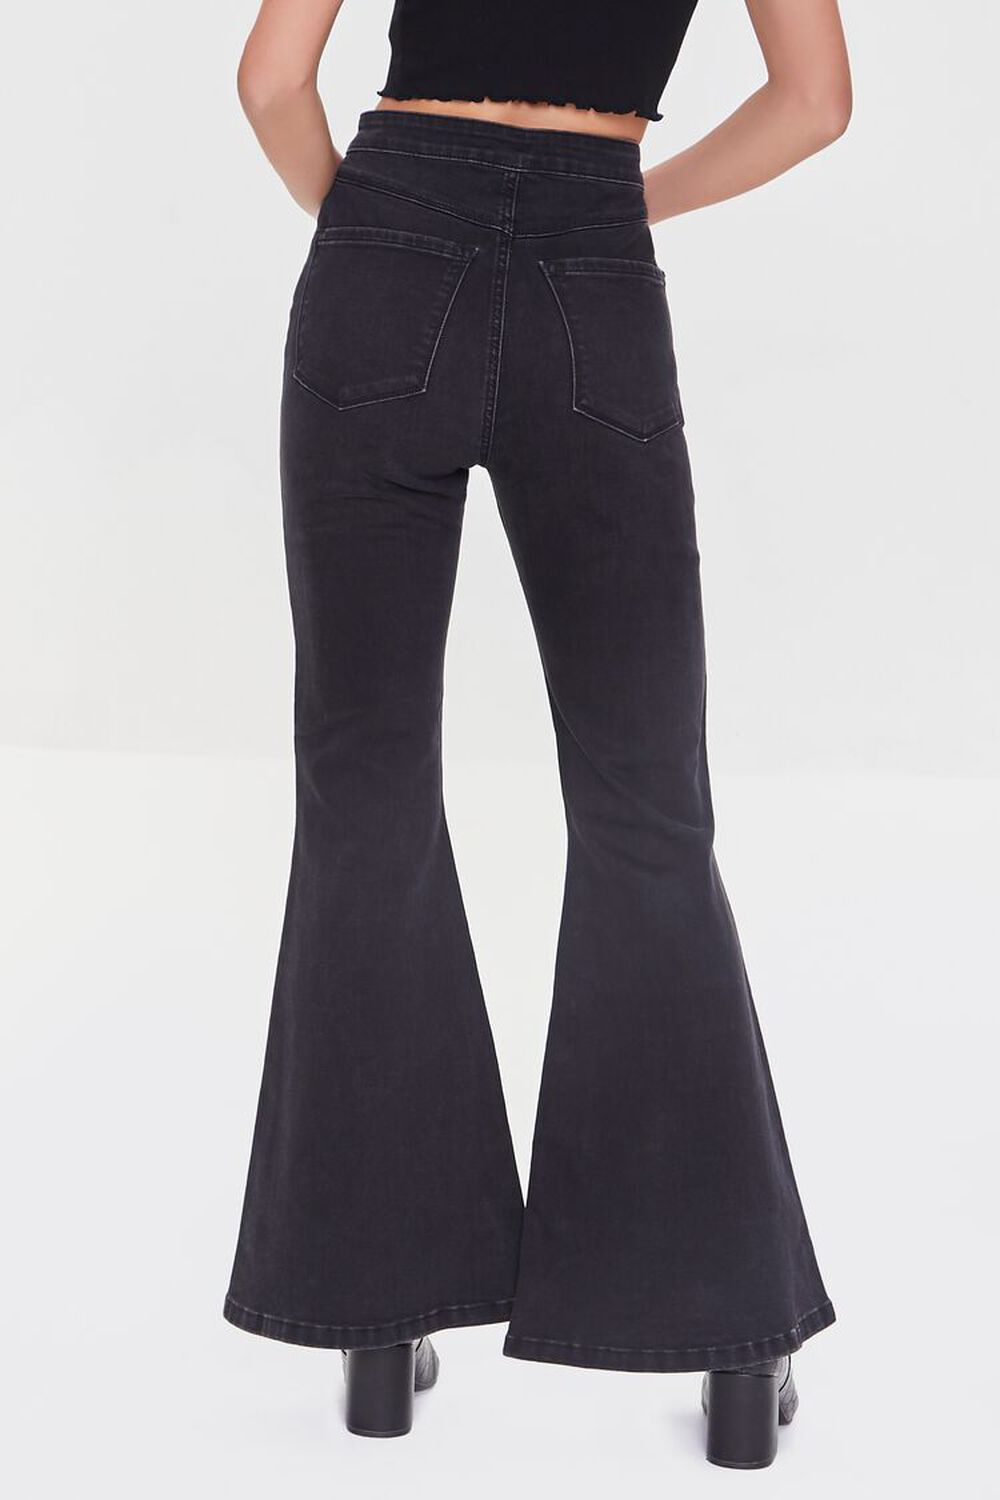 Recycled Cotton Flare HighRise Jeans